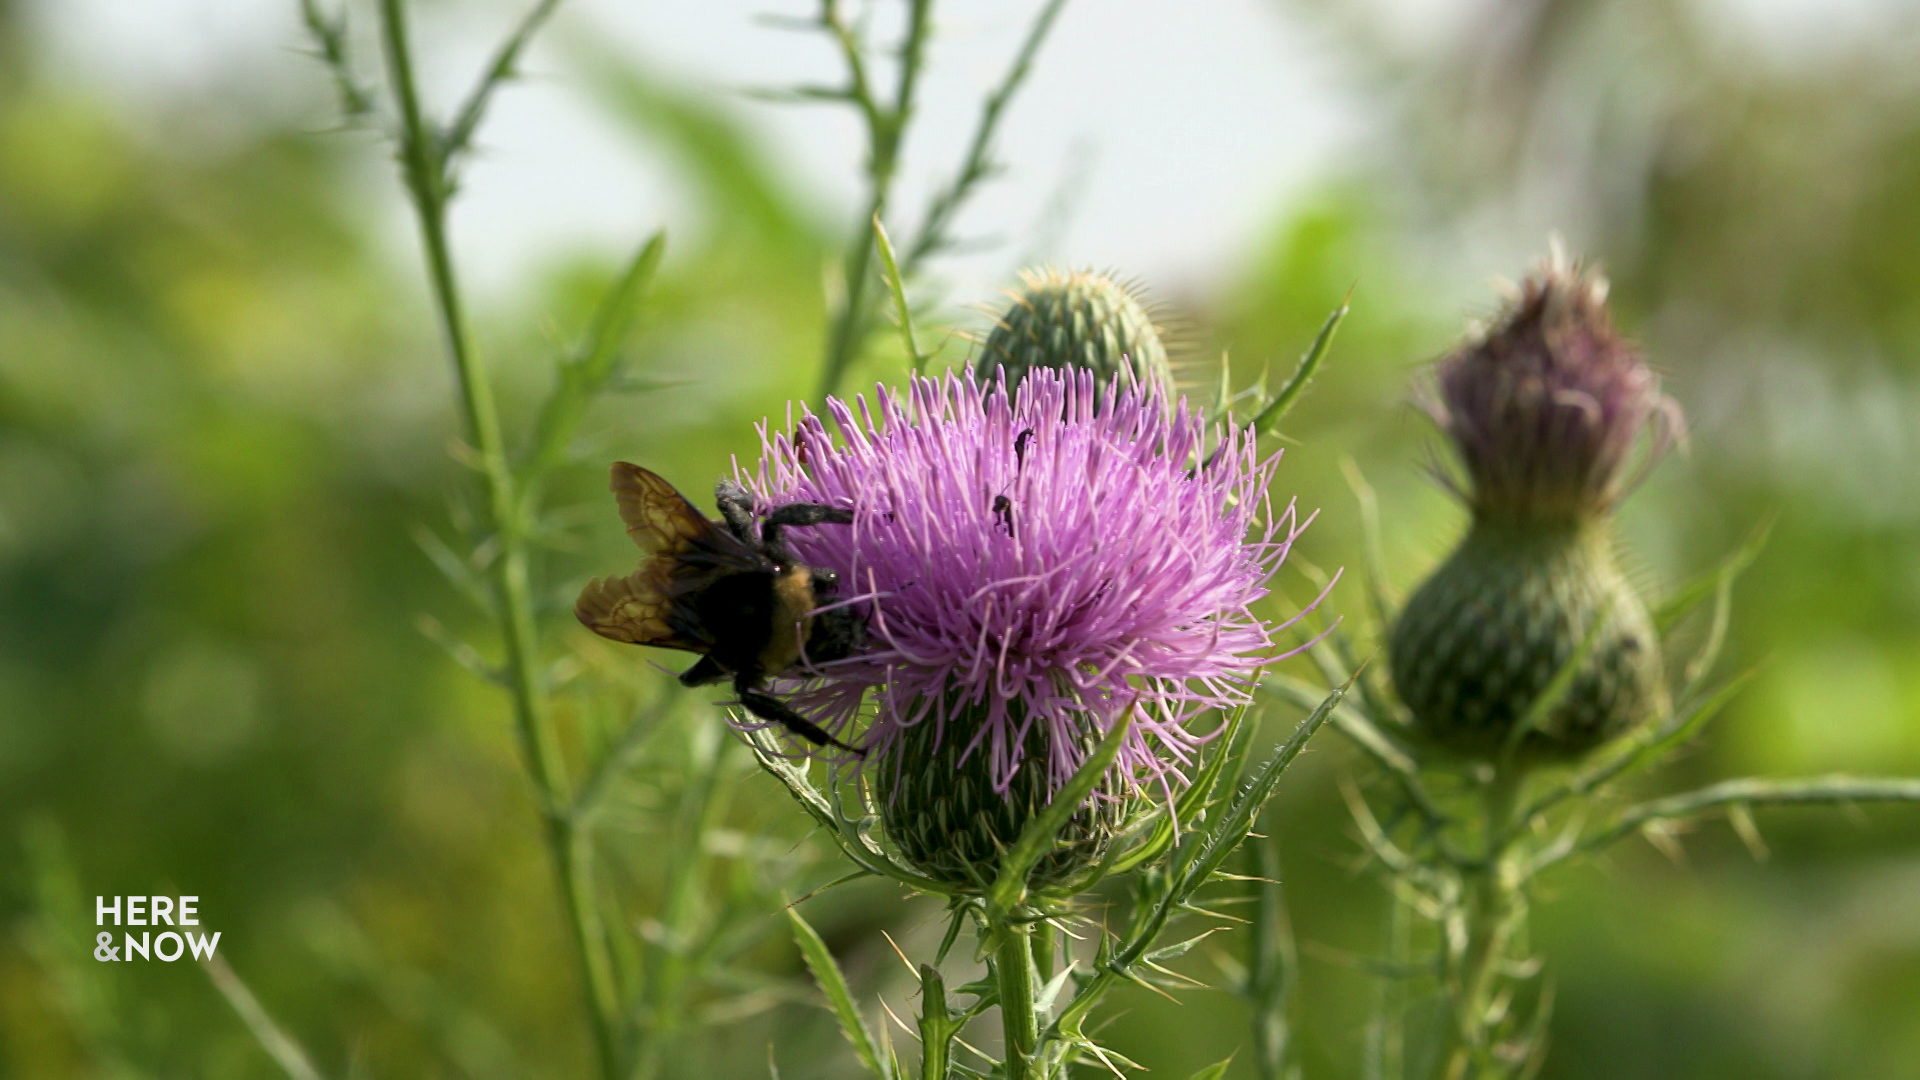 A bee collects pollen from the flower of a thistle, with other flowers in the background.